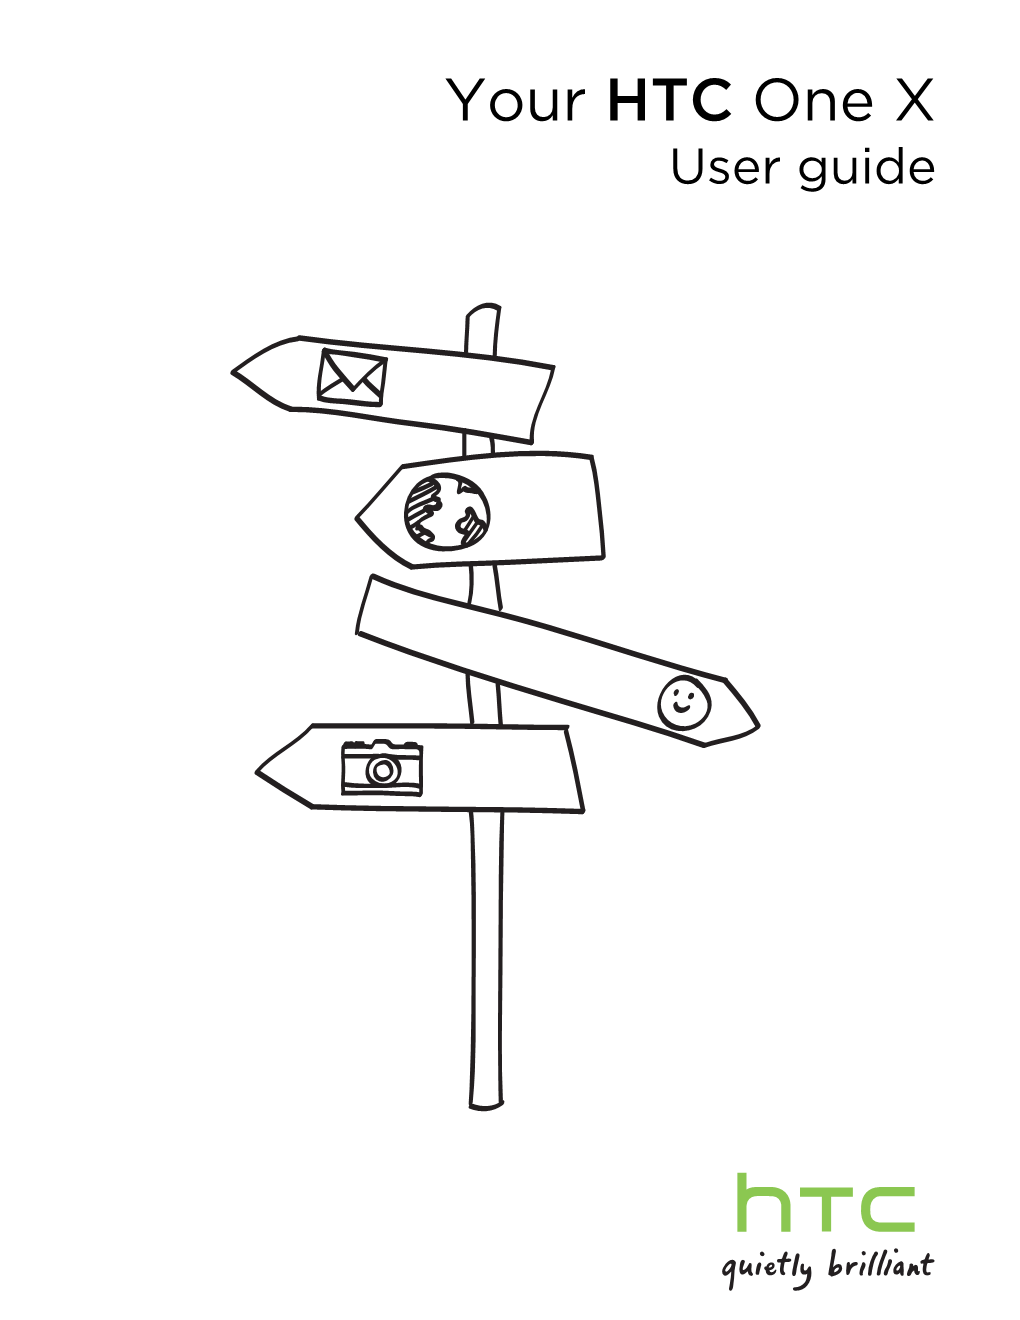 Your HTC One X User Guide 2 Contents Contents